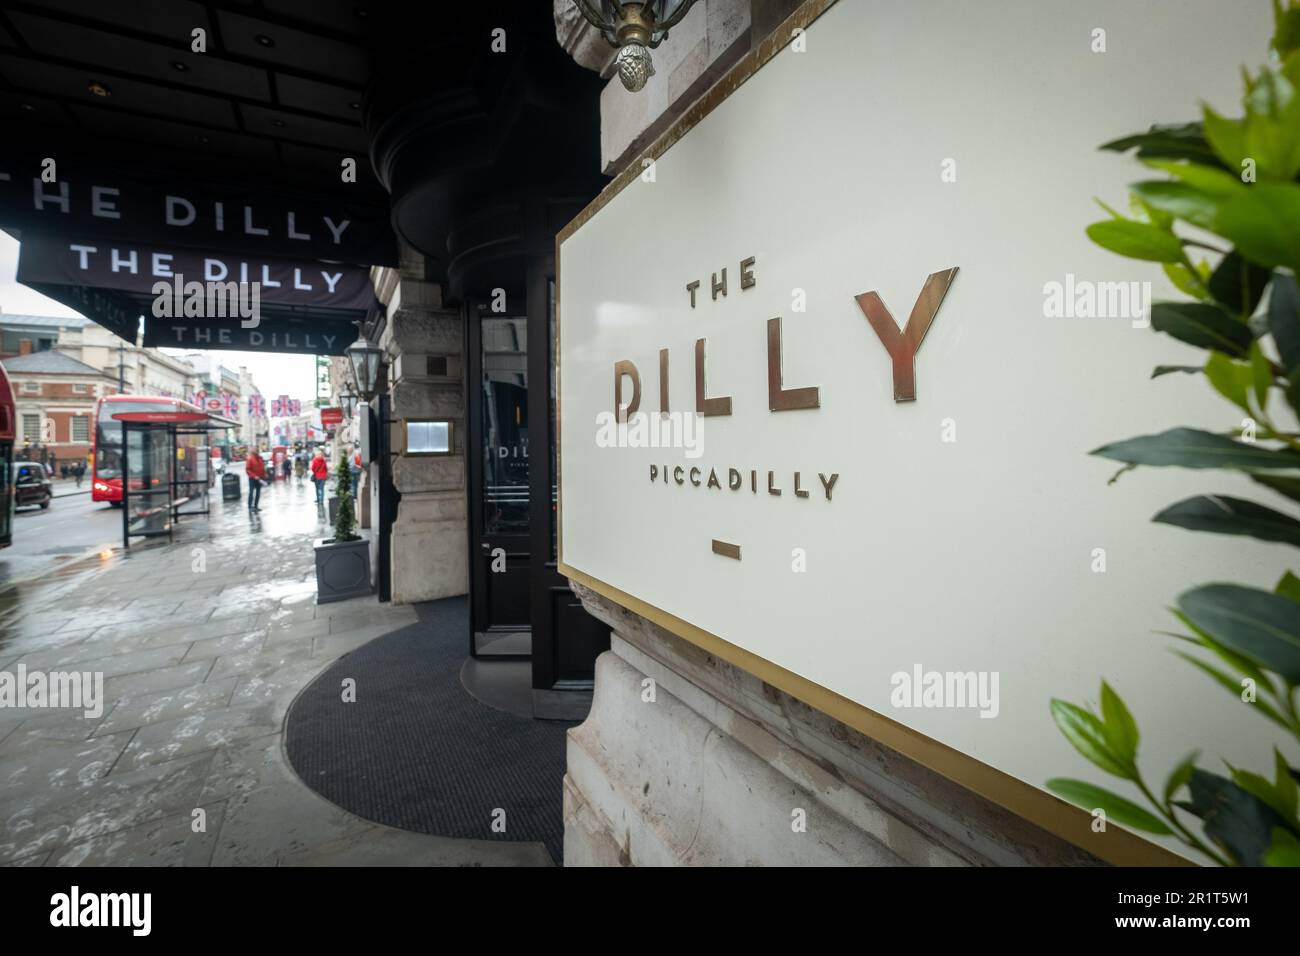 London - Mai 2023: Das Dilly- Hotel, Restaurant und Spa am Piccadilly, Londons West End Stockfoto